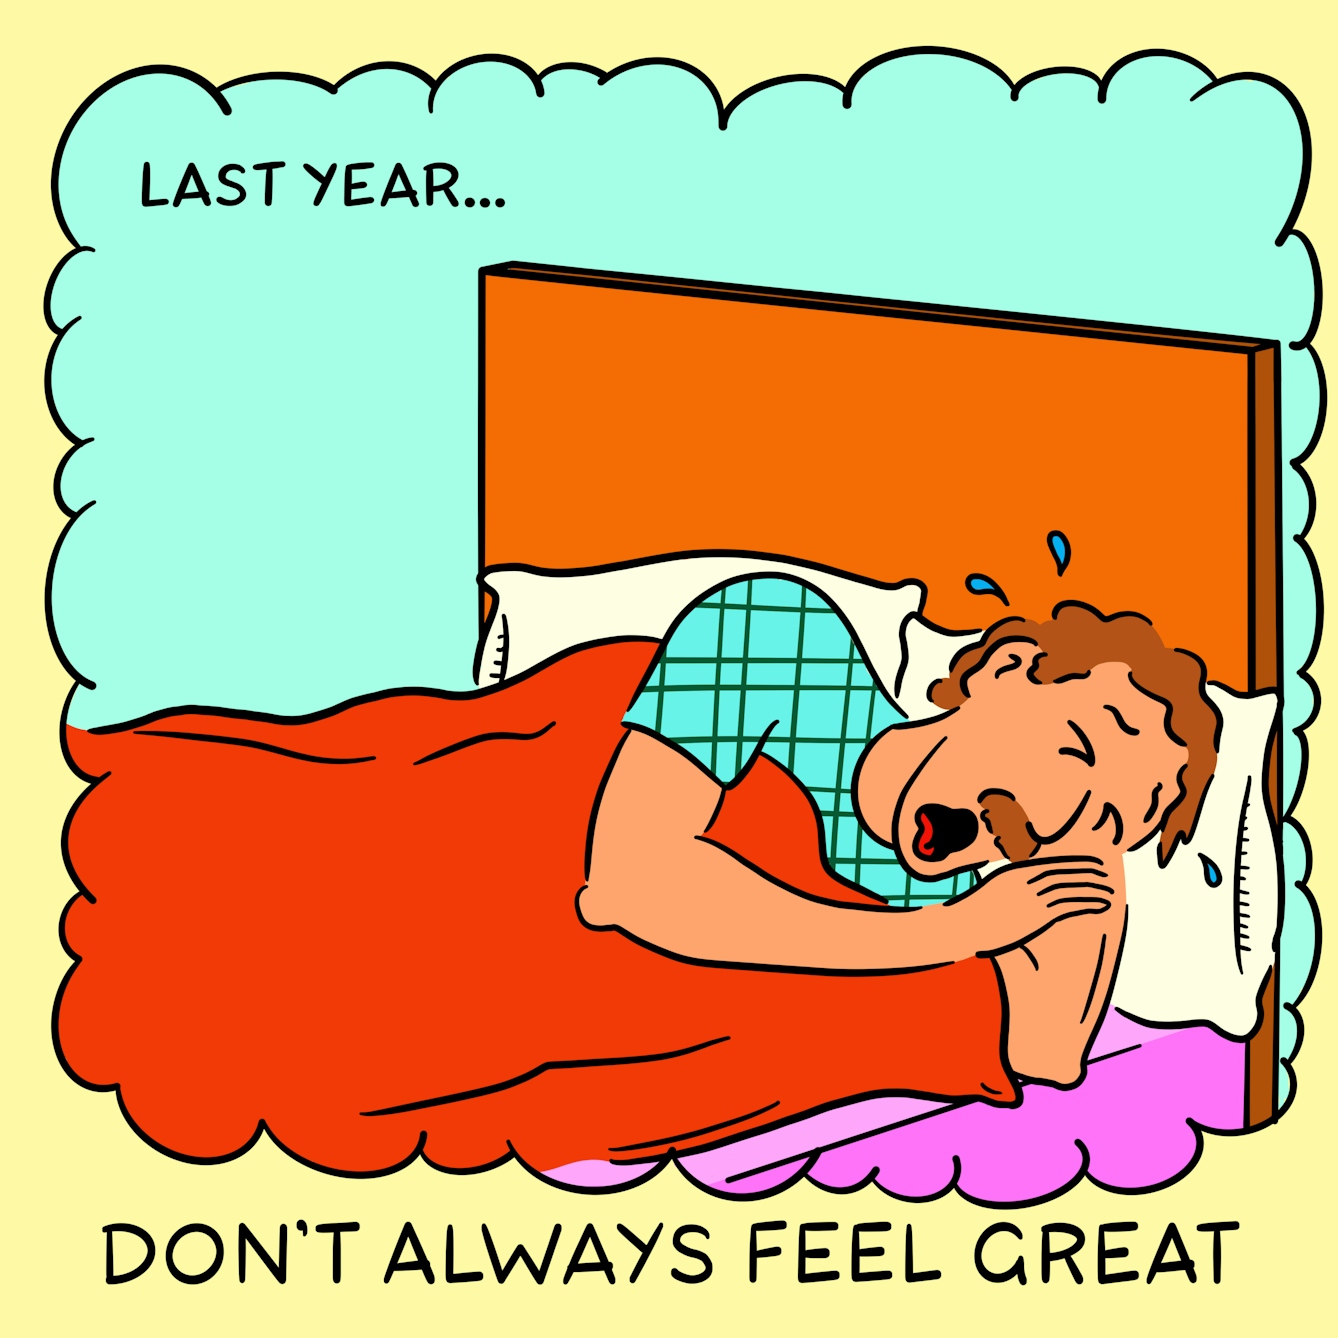 Panel 4 of a four-panel comic drawn digitally: in a thought bubble, with "Last year..." at the top to indicate when the memory is from, a white man with a moustache and a plaid shirt lays in bed weeping. The caption text reads "Don't always feel great"